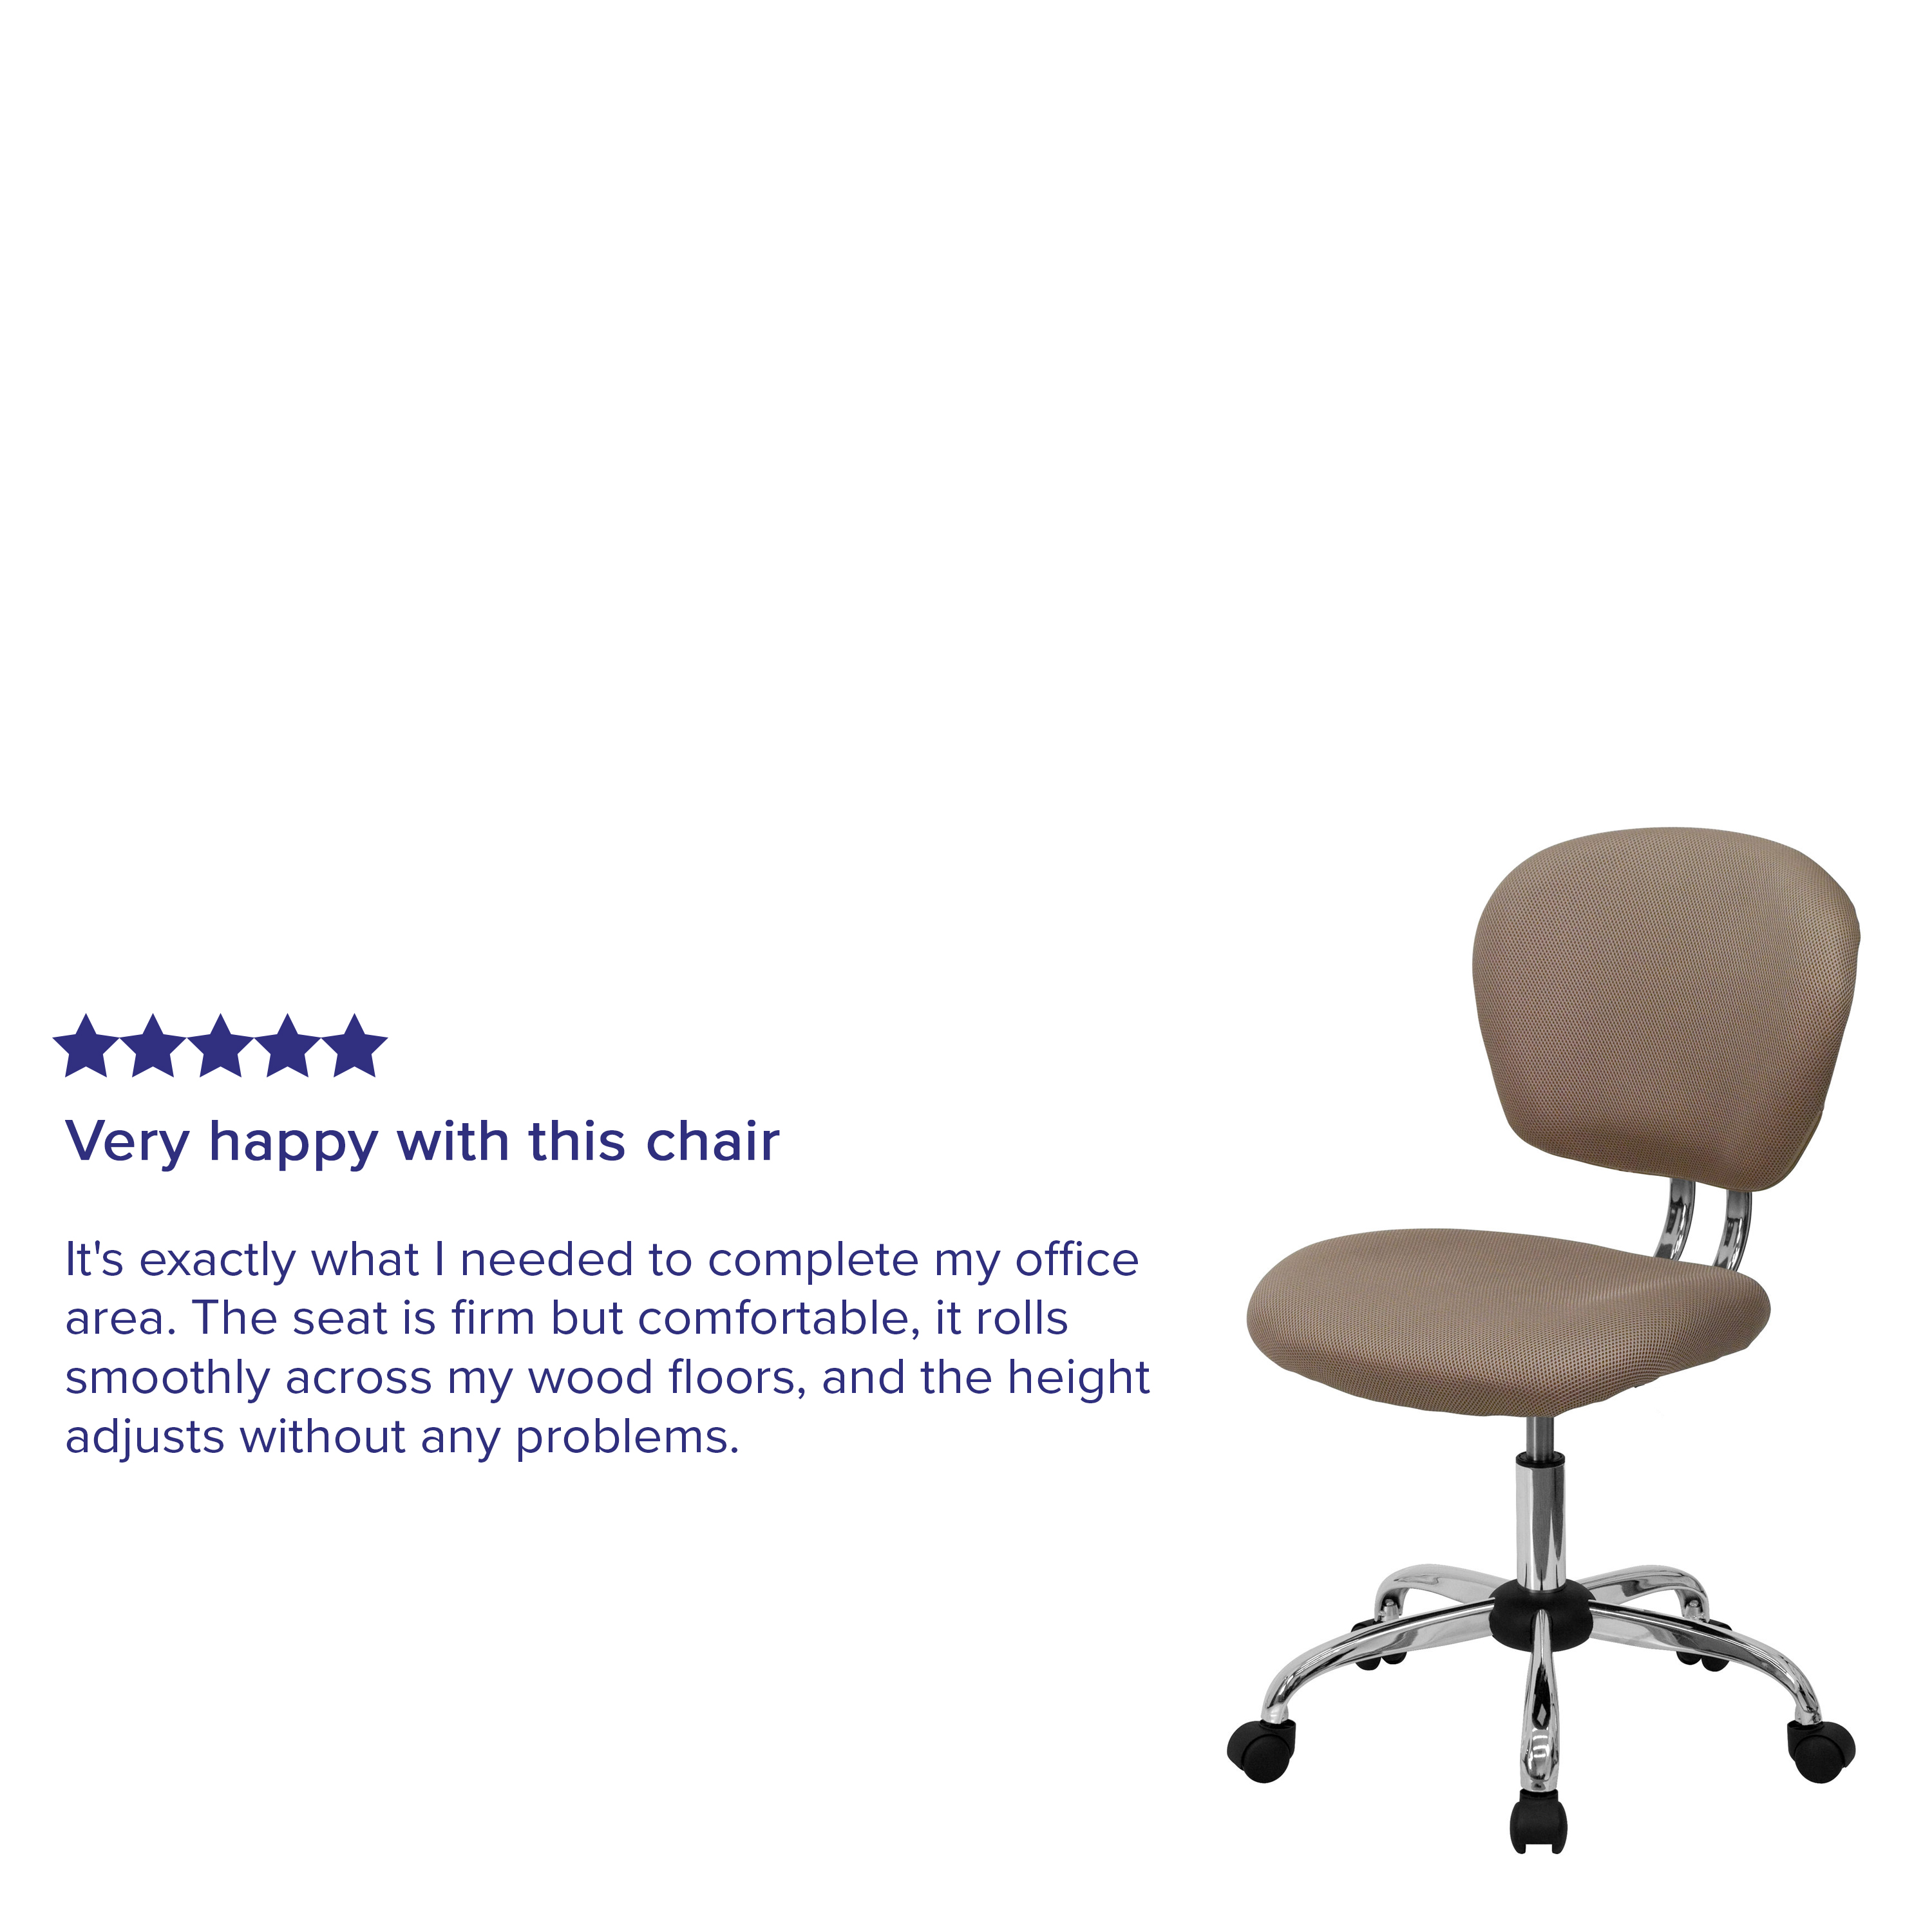 Emma + Oliver Mid-Back Coffee Brown Mesh Swivel Task Office Chair with Chrome Base - image 5 of 13